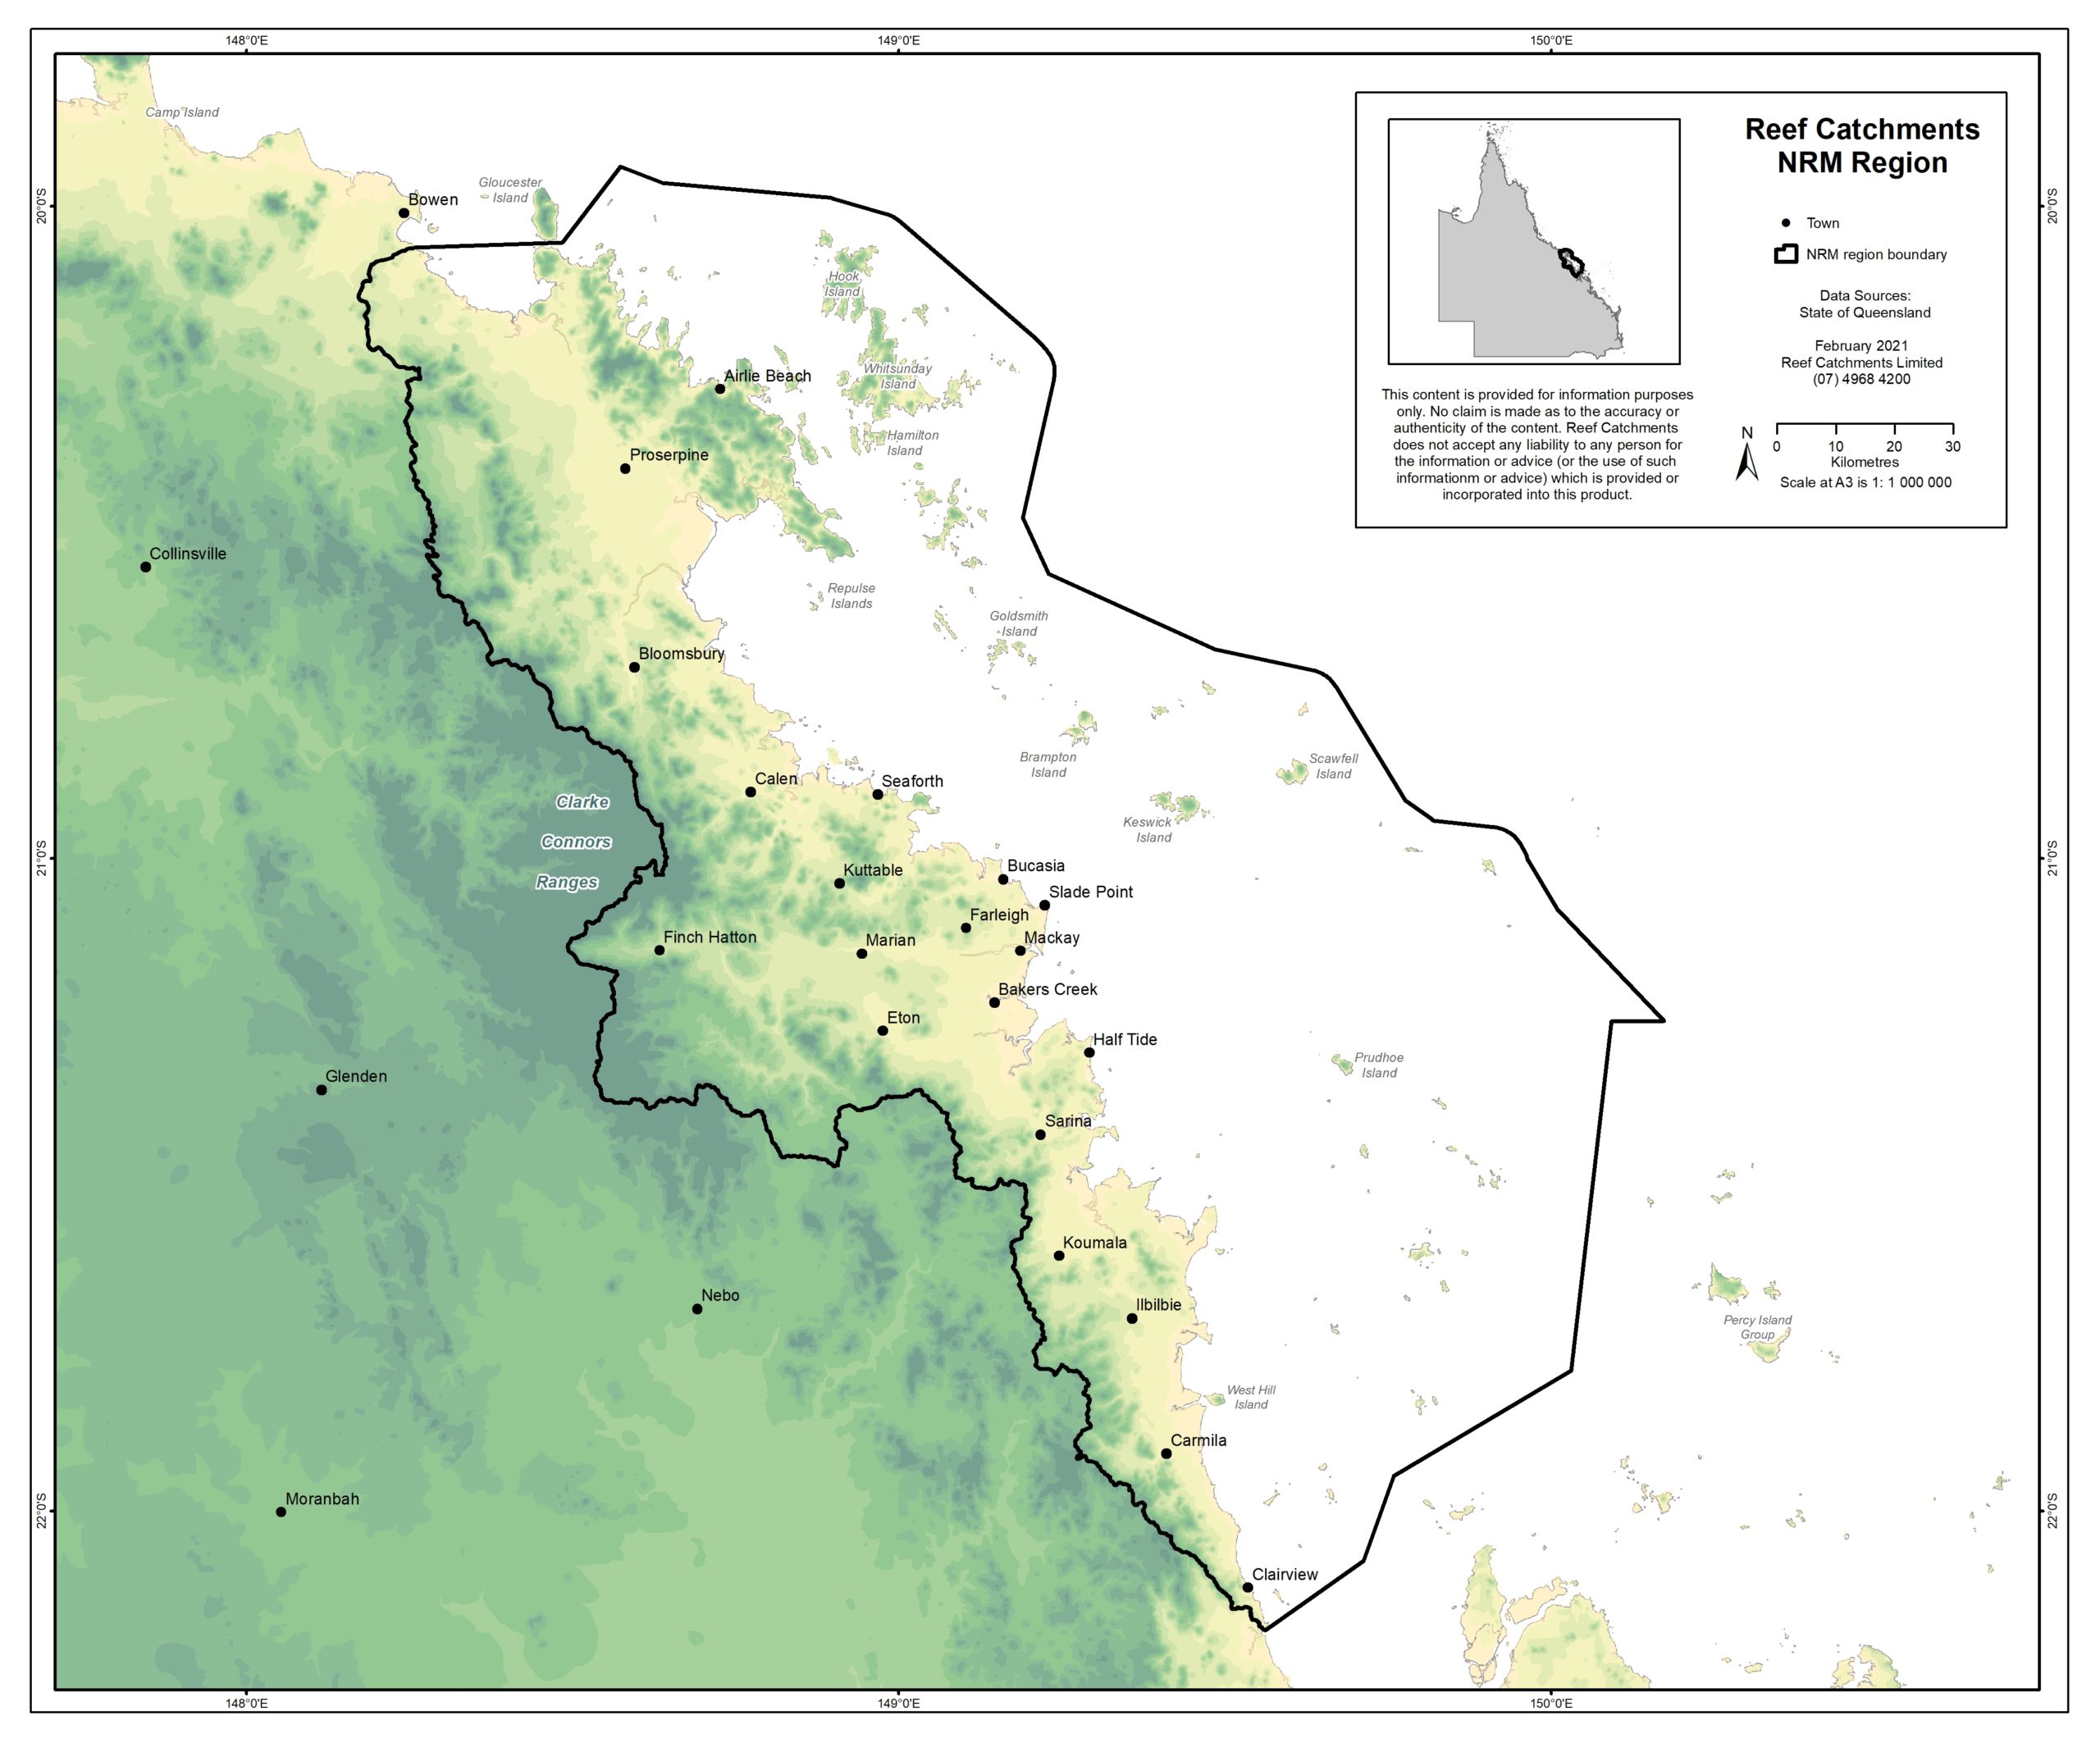 Map of Reef Catchments NRM area.